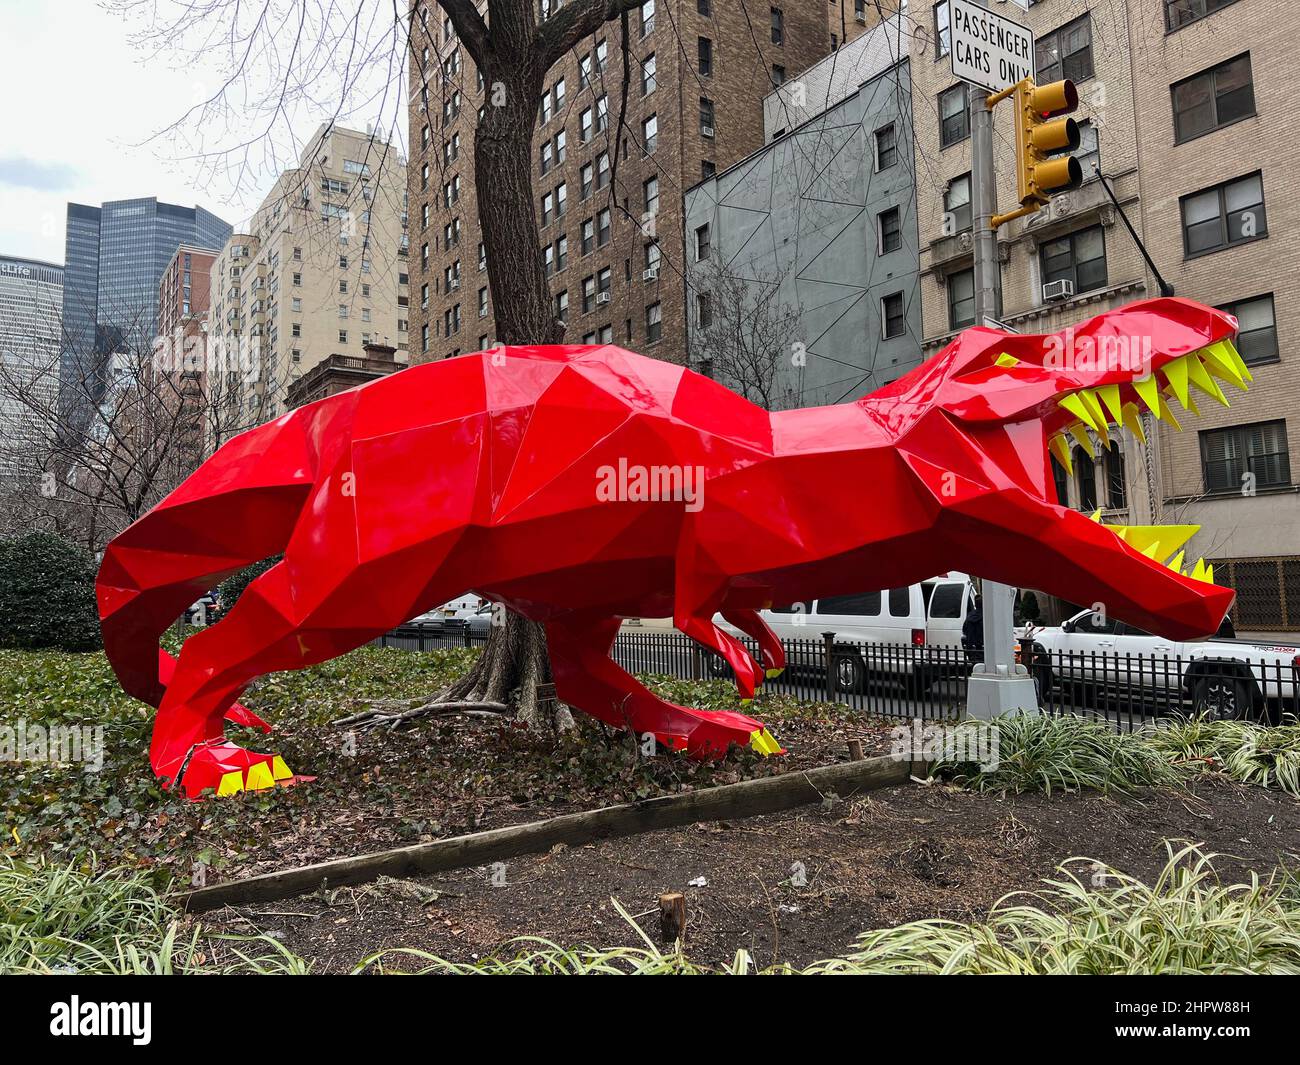 New York, United States. 23rd Feb, 2022. Rexor the Tyrannosaurus Rex by artist Idriss B. stands in the flower bed mall in between Park Avenue in New York on Feb. 23, 2022. Rexor is part of an outdoor art installation supported by Patrons of Park Avenue, a neighborhood association in the Murray Hill neighborhood of New York. (Photo by Samuel Rigelhaupt/Sipa USA ) Credit: Sipa USA/Alamy Live News Stock Photo